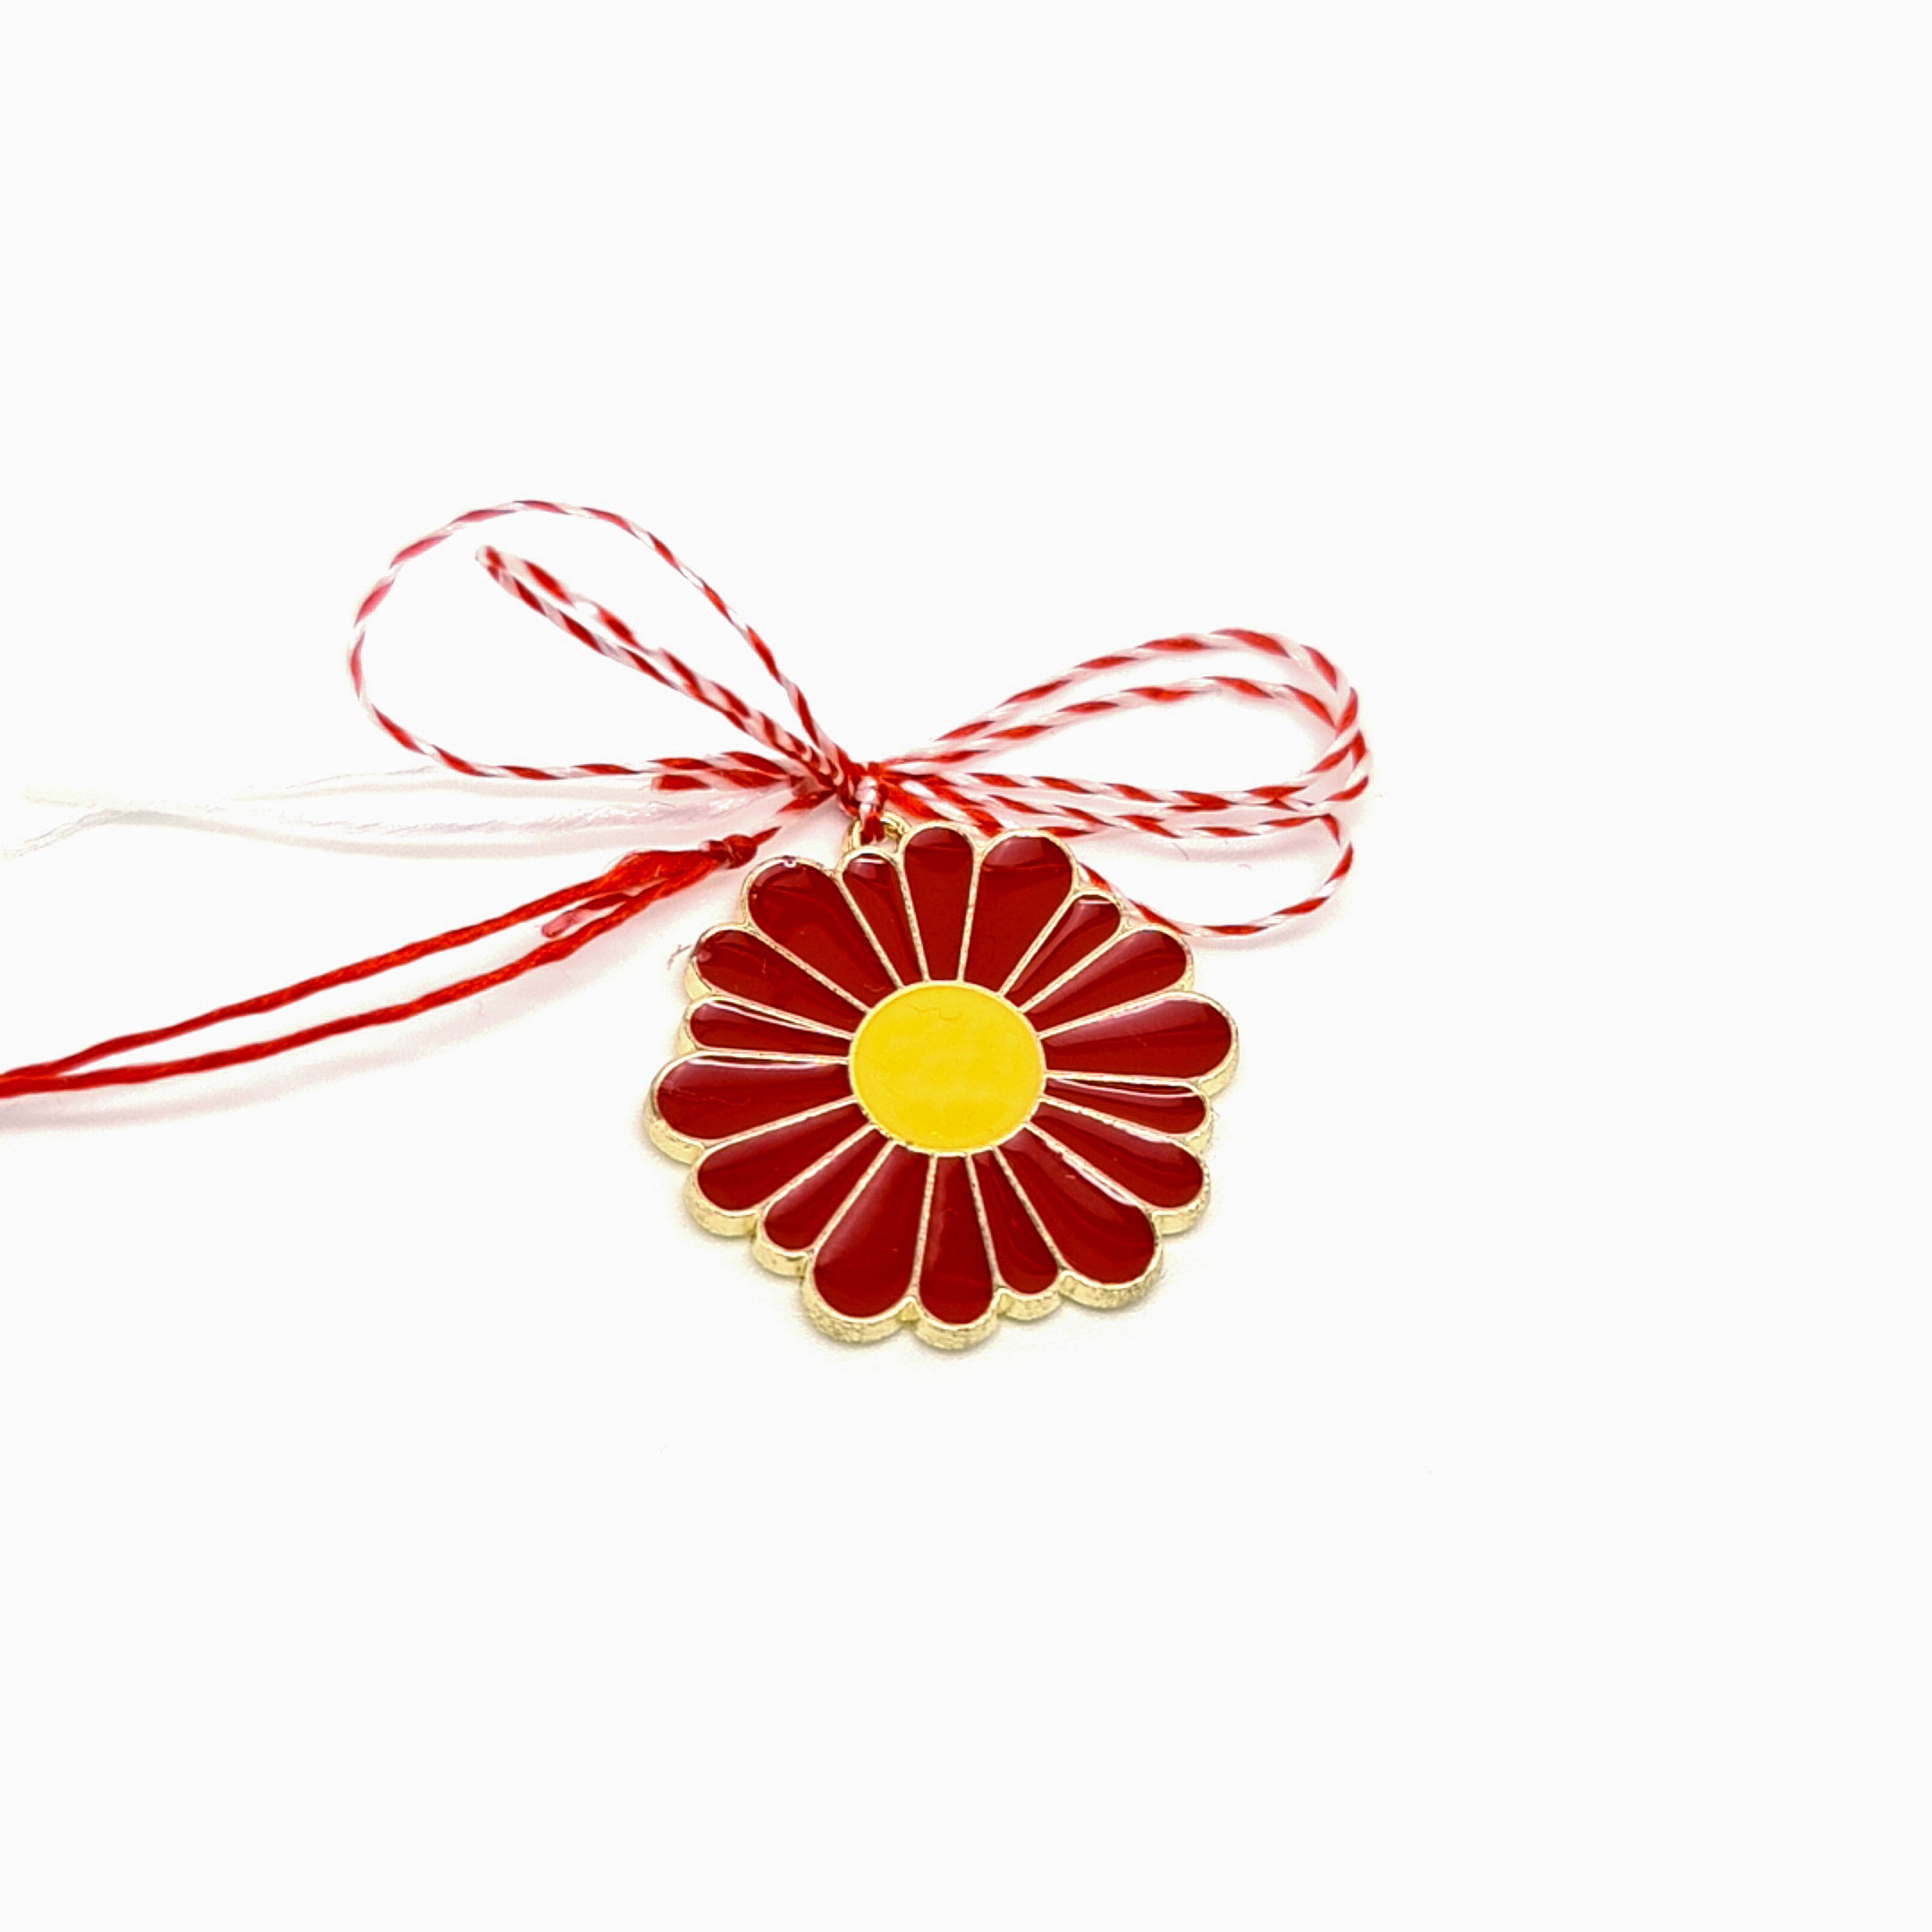 Spring Daisy Martisor with Red Charm - Symbol of Passion and Love